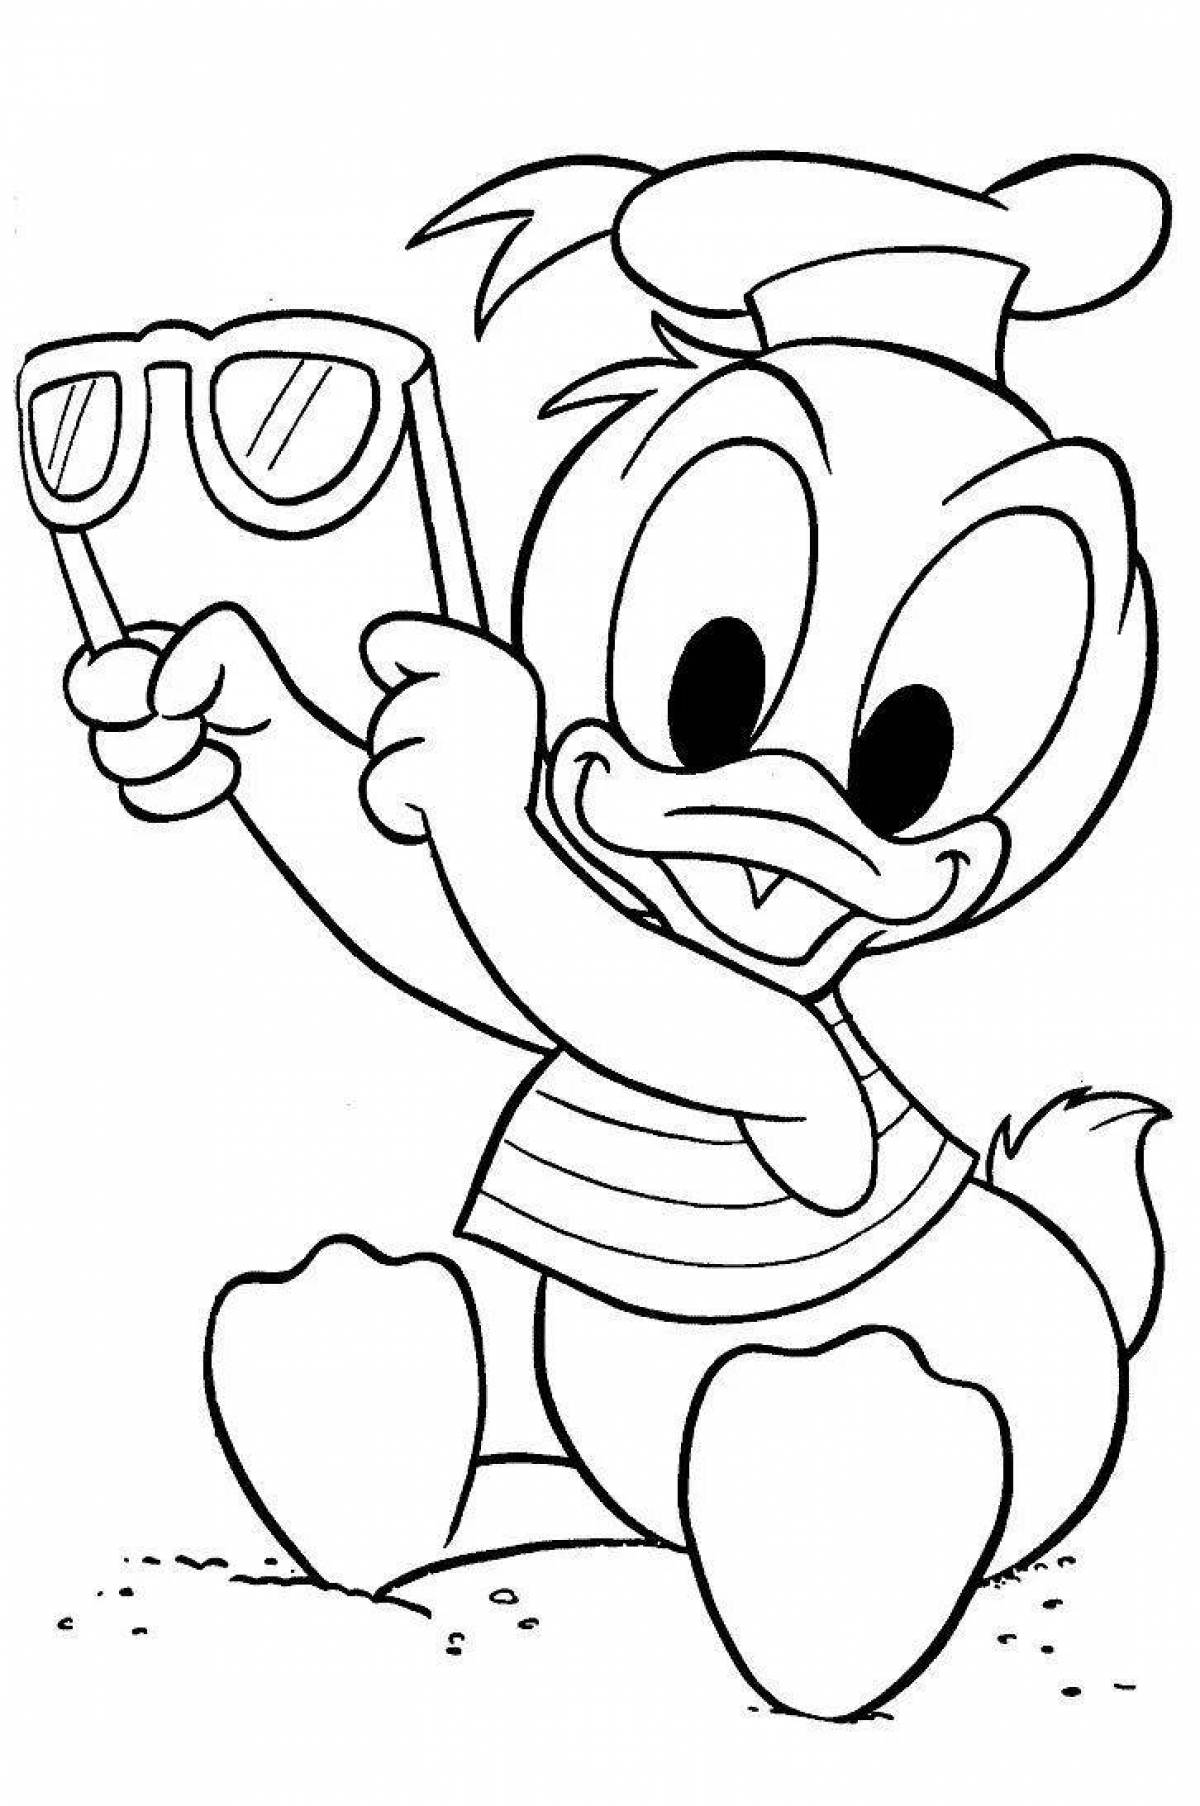 Coloring book adorable cartoon characters for kids